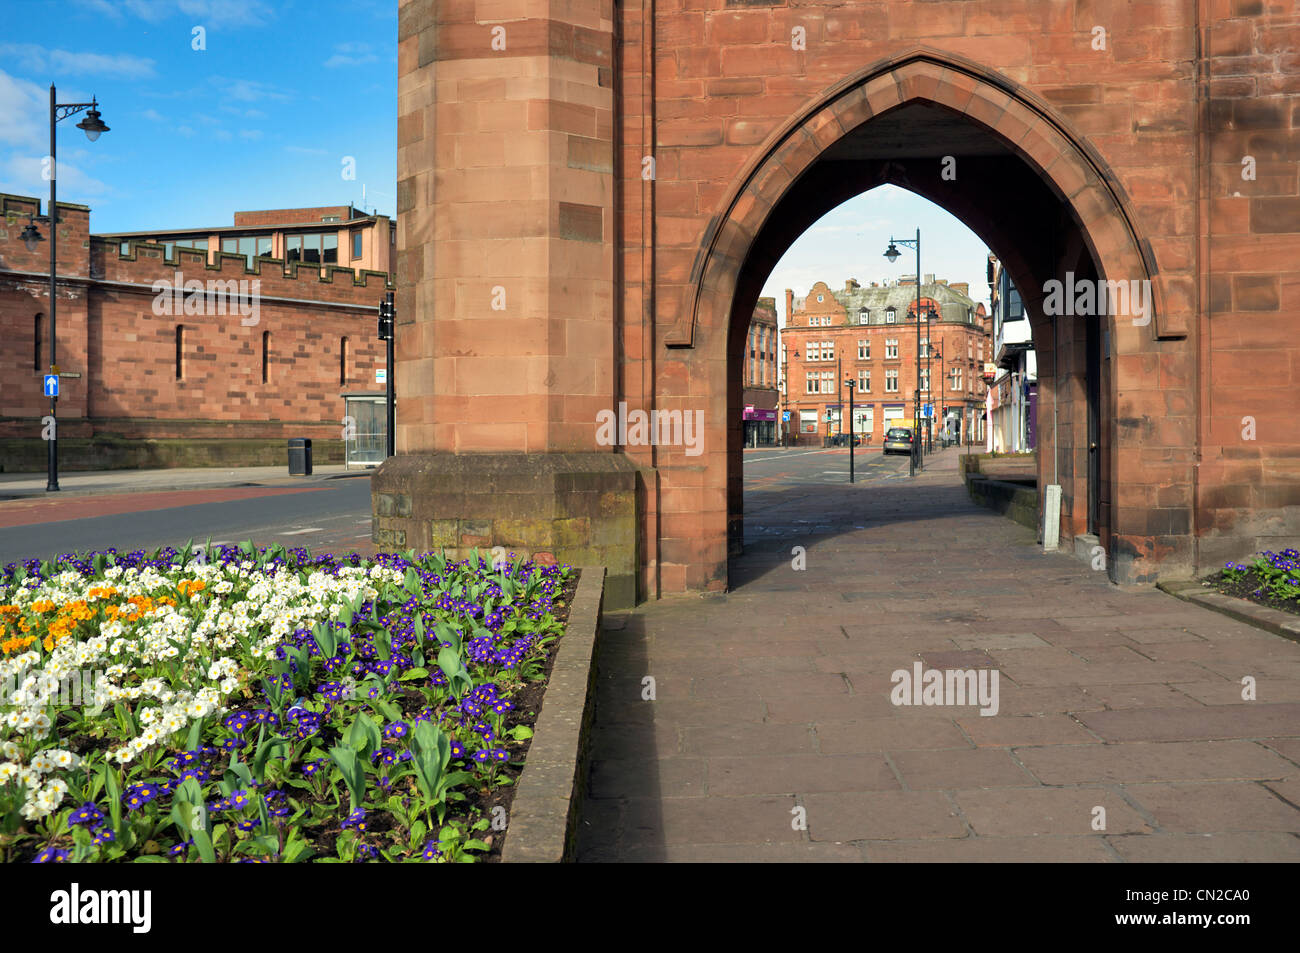 Carlisle City center looking through one of the arches of the Citadel towards the main shopping area, Cumbria, United Kingdom Stock Photo